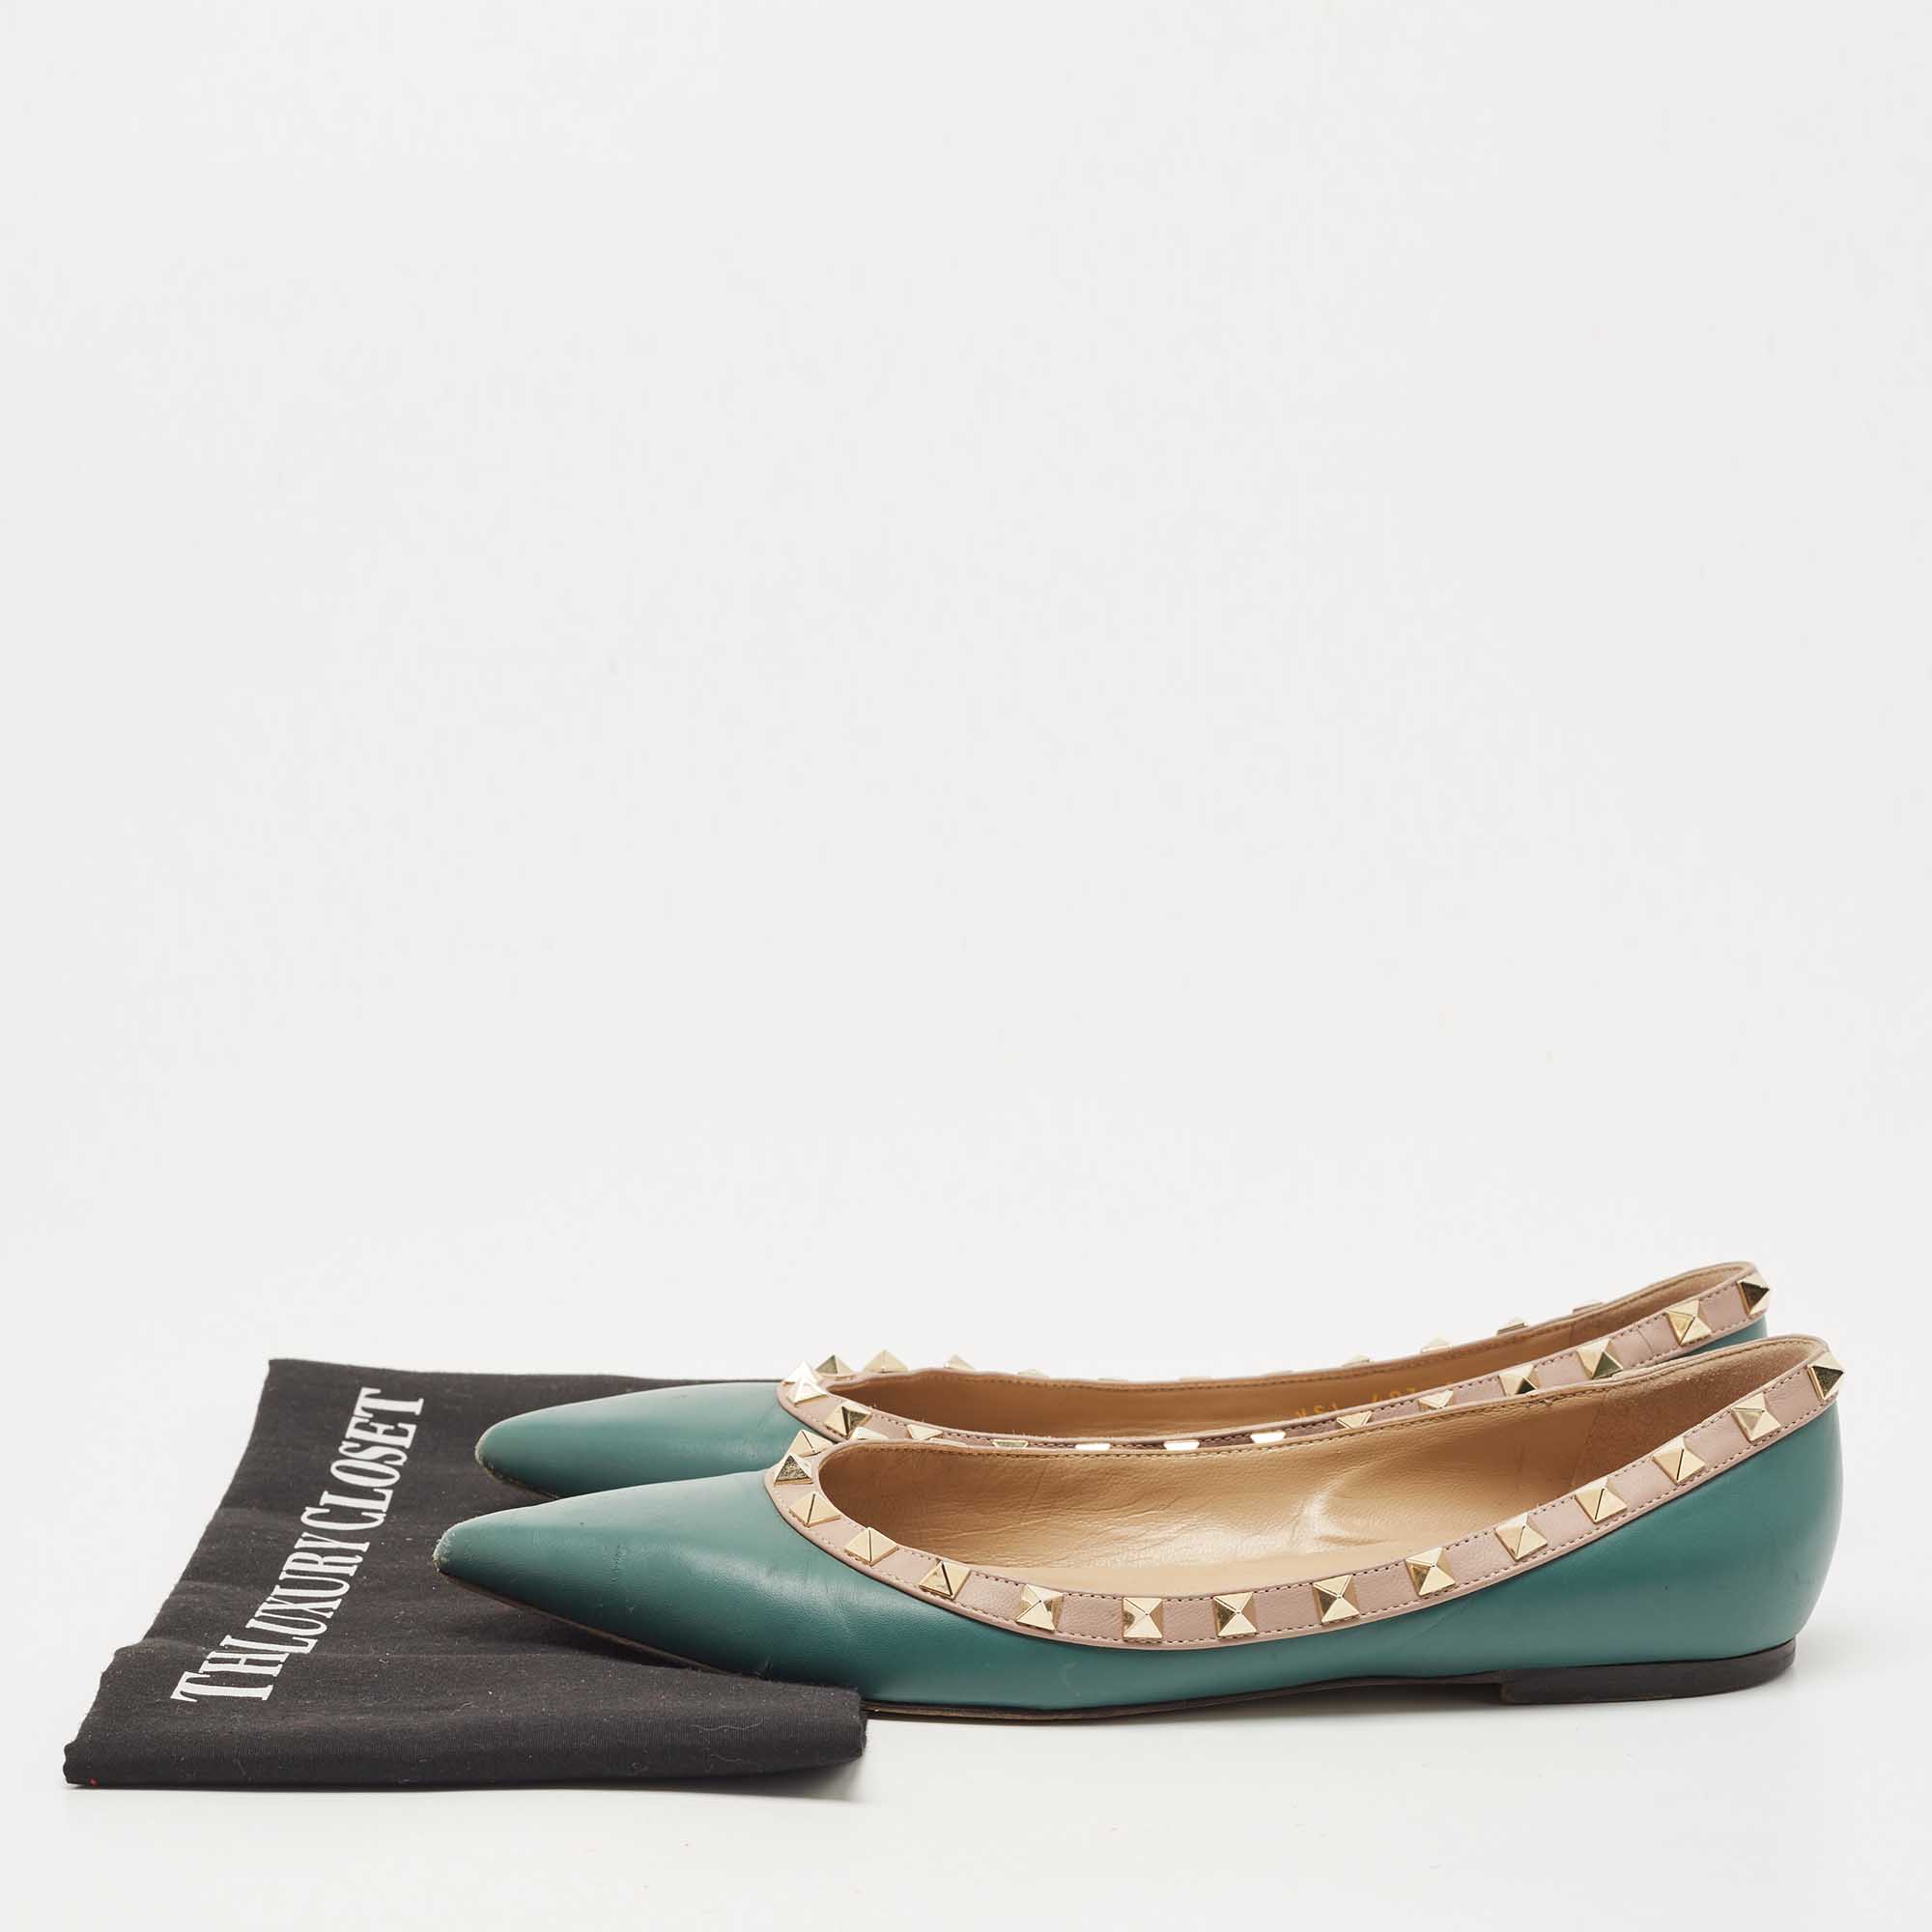 Valentino Green/Dusty Pink Leather Rockstud Ballet Flats Size 39.5